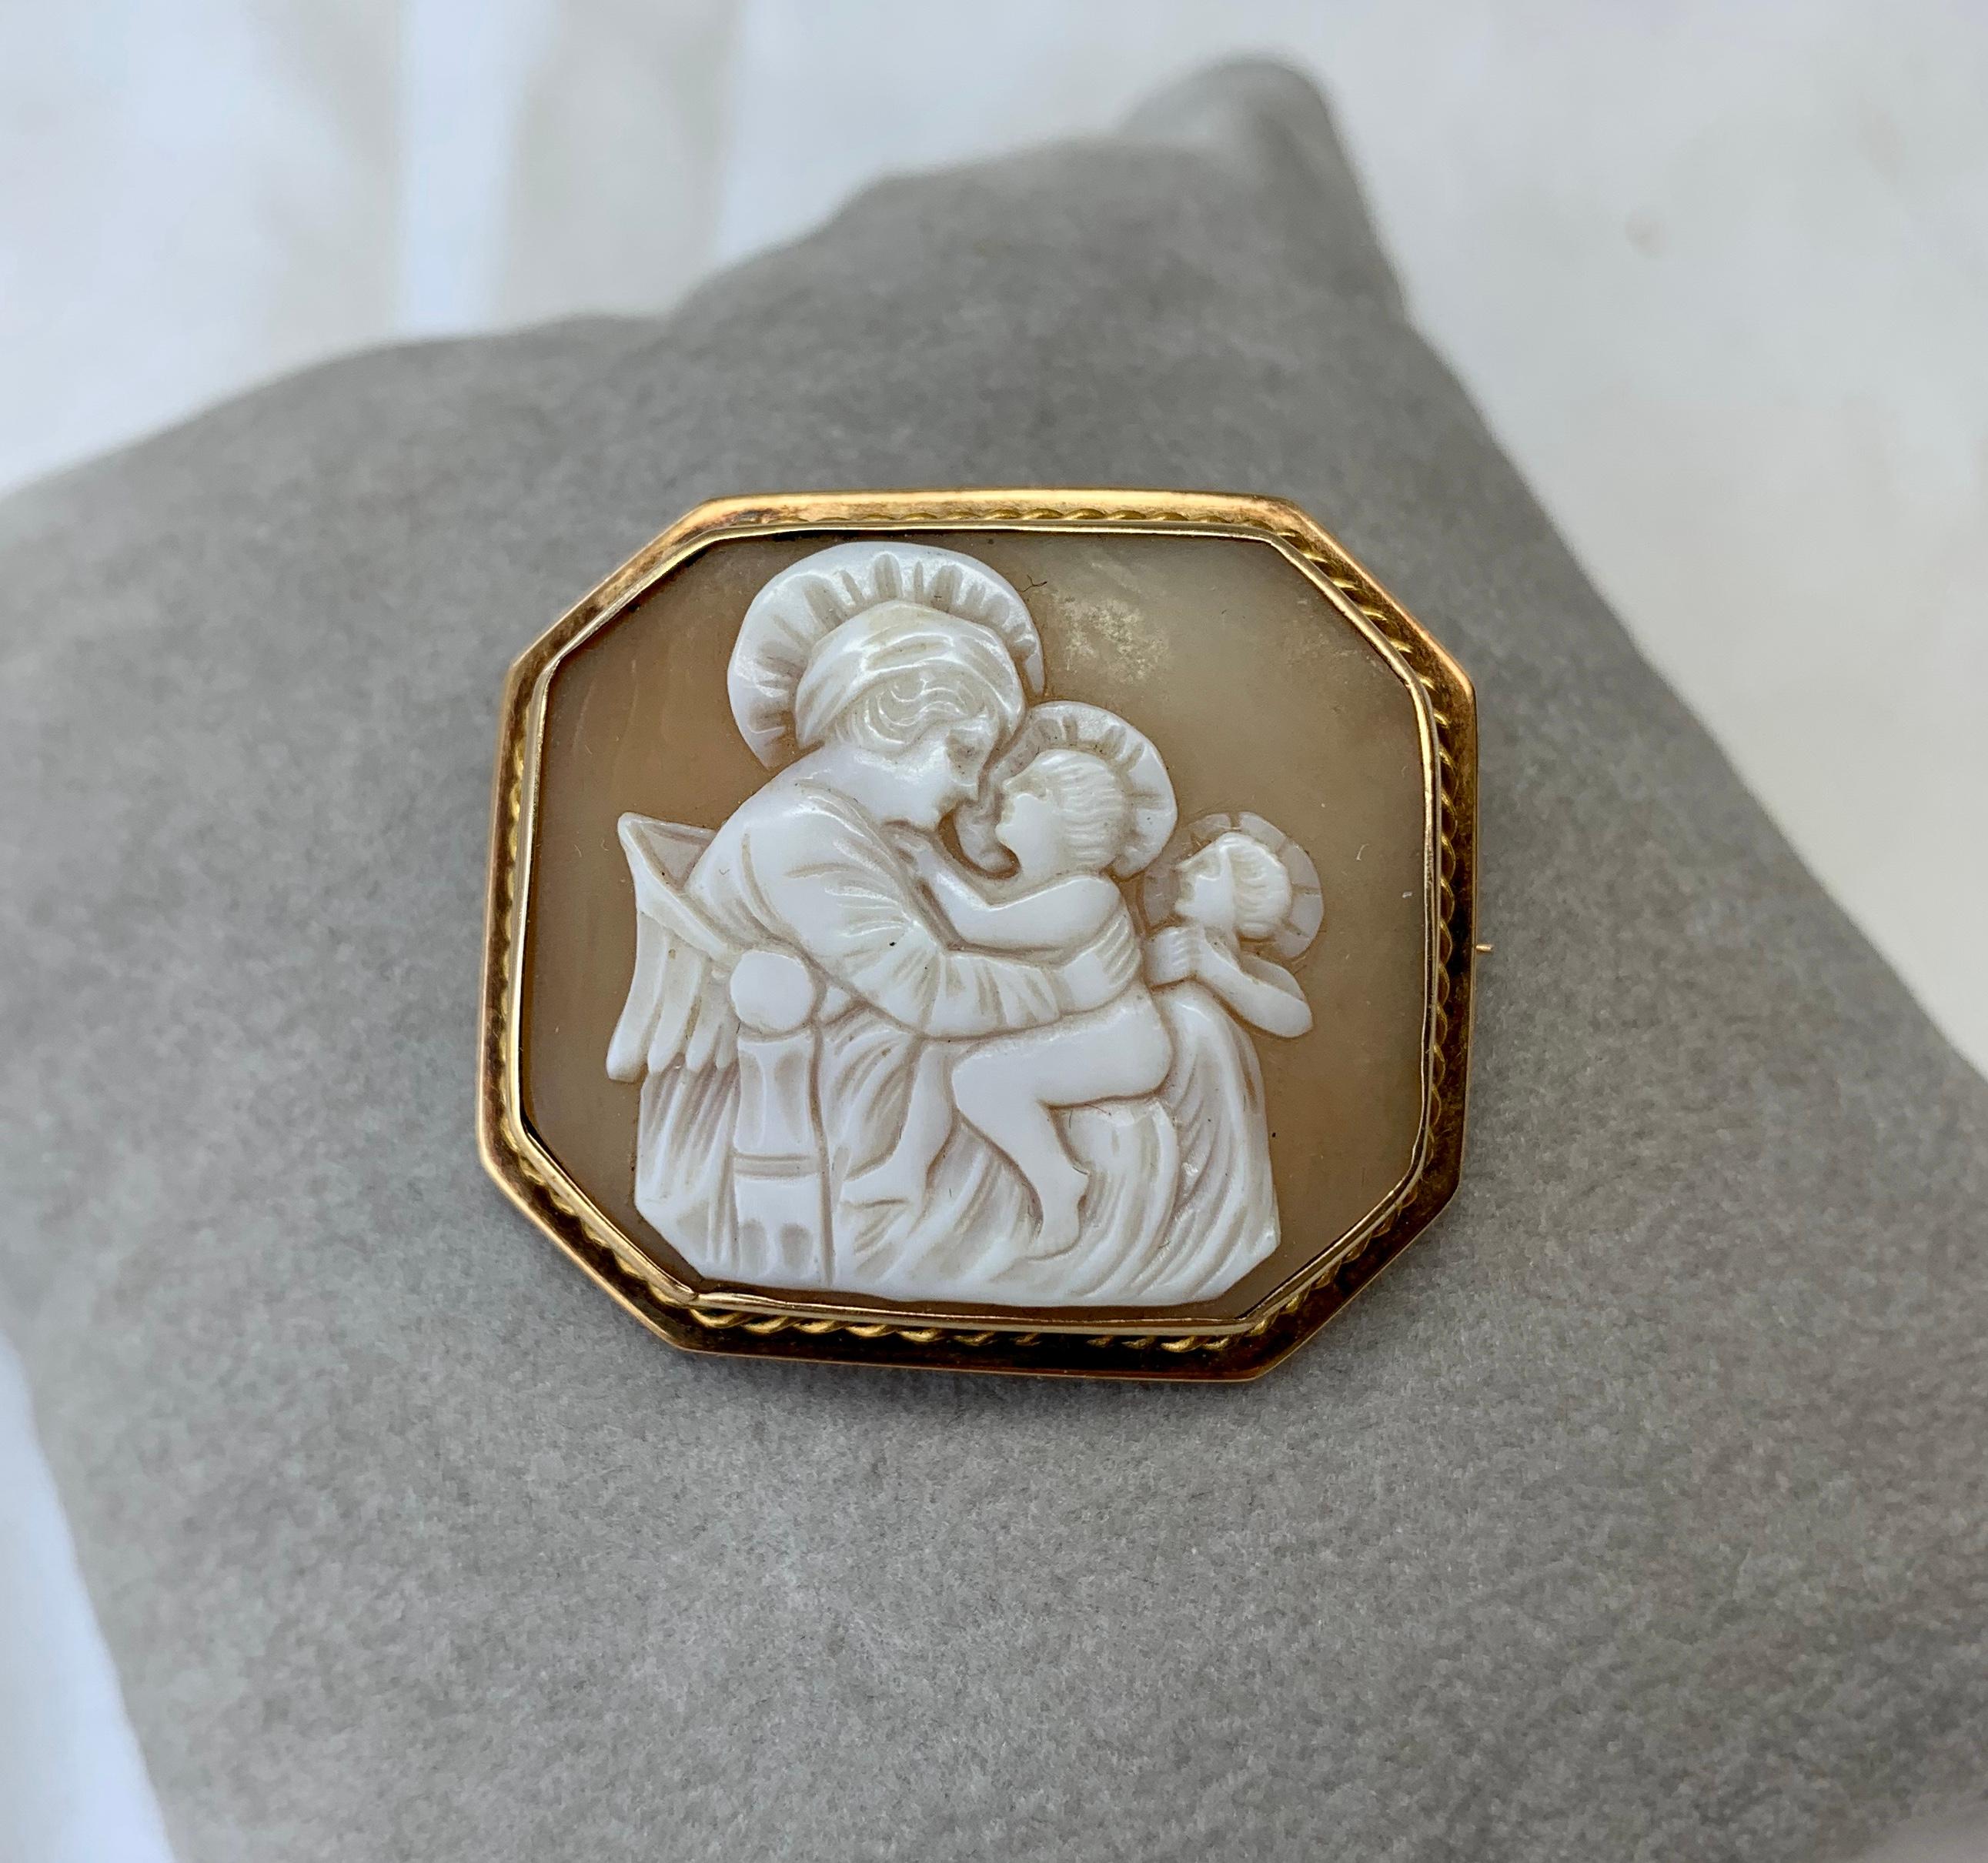 This is an absolutely stunning and very rare antique Victorian - Belle Epoque Shell Cameo Pendant Brooch Pin with a hand carved image of the Madonna with Child and a Guardian Angel watching set in a gorgeous 10 Karat Yellow Gold frame.   Cameos with